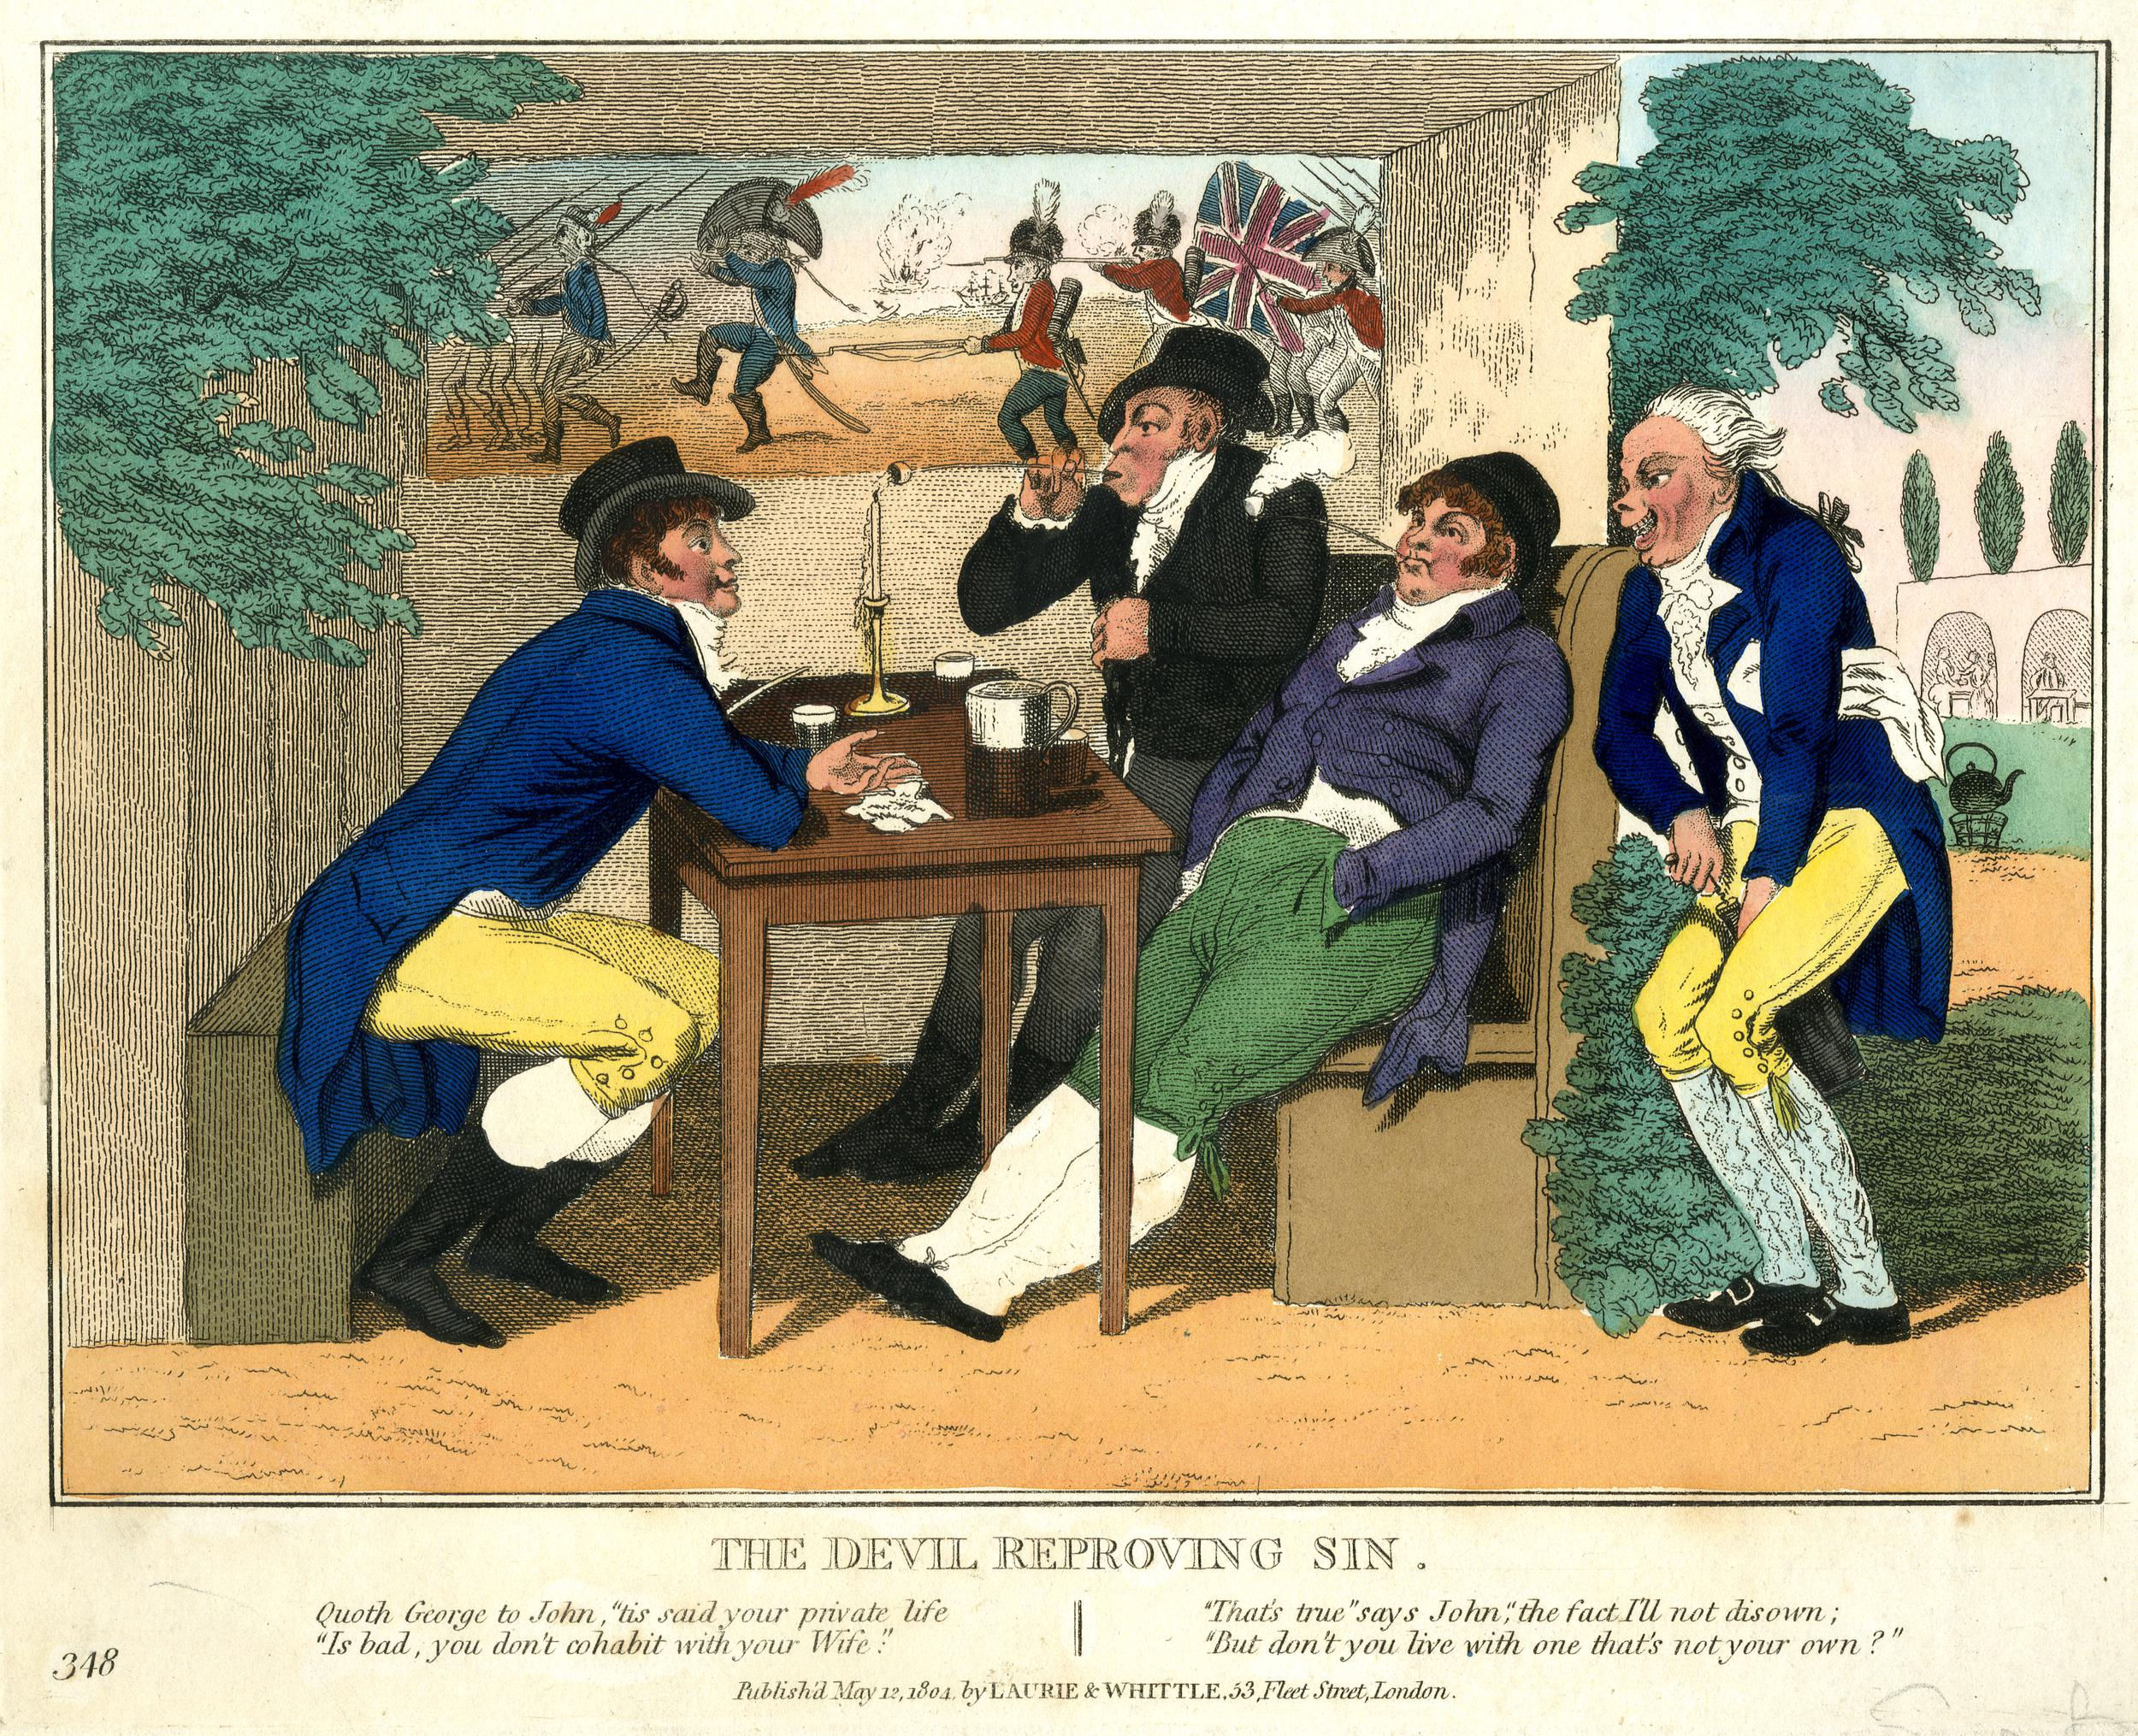 Hand-colored etching of four men smoking and drinking alcohol at a table outdoors.